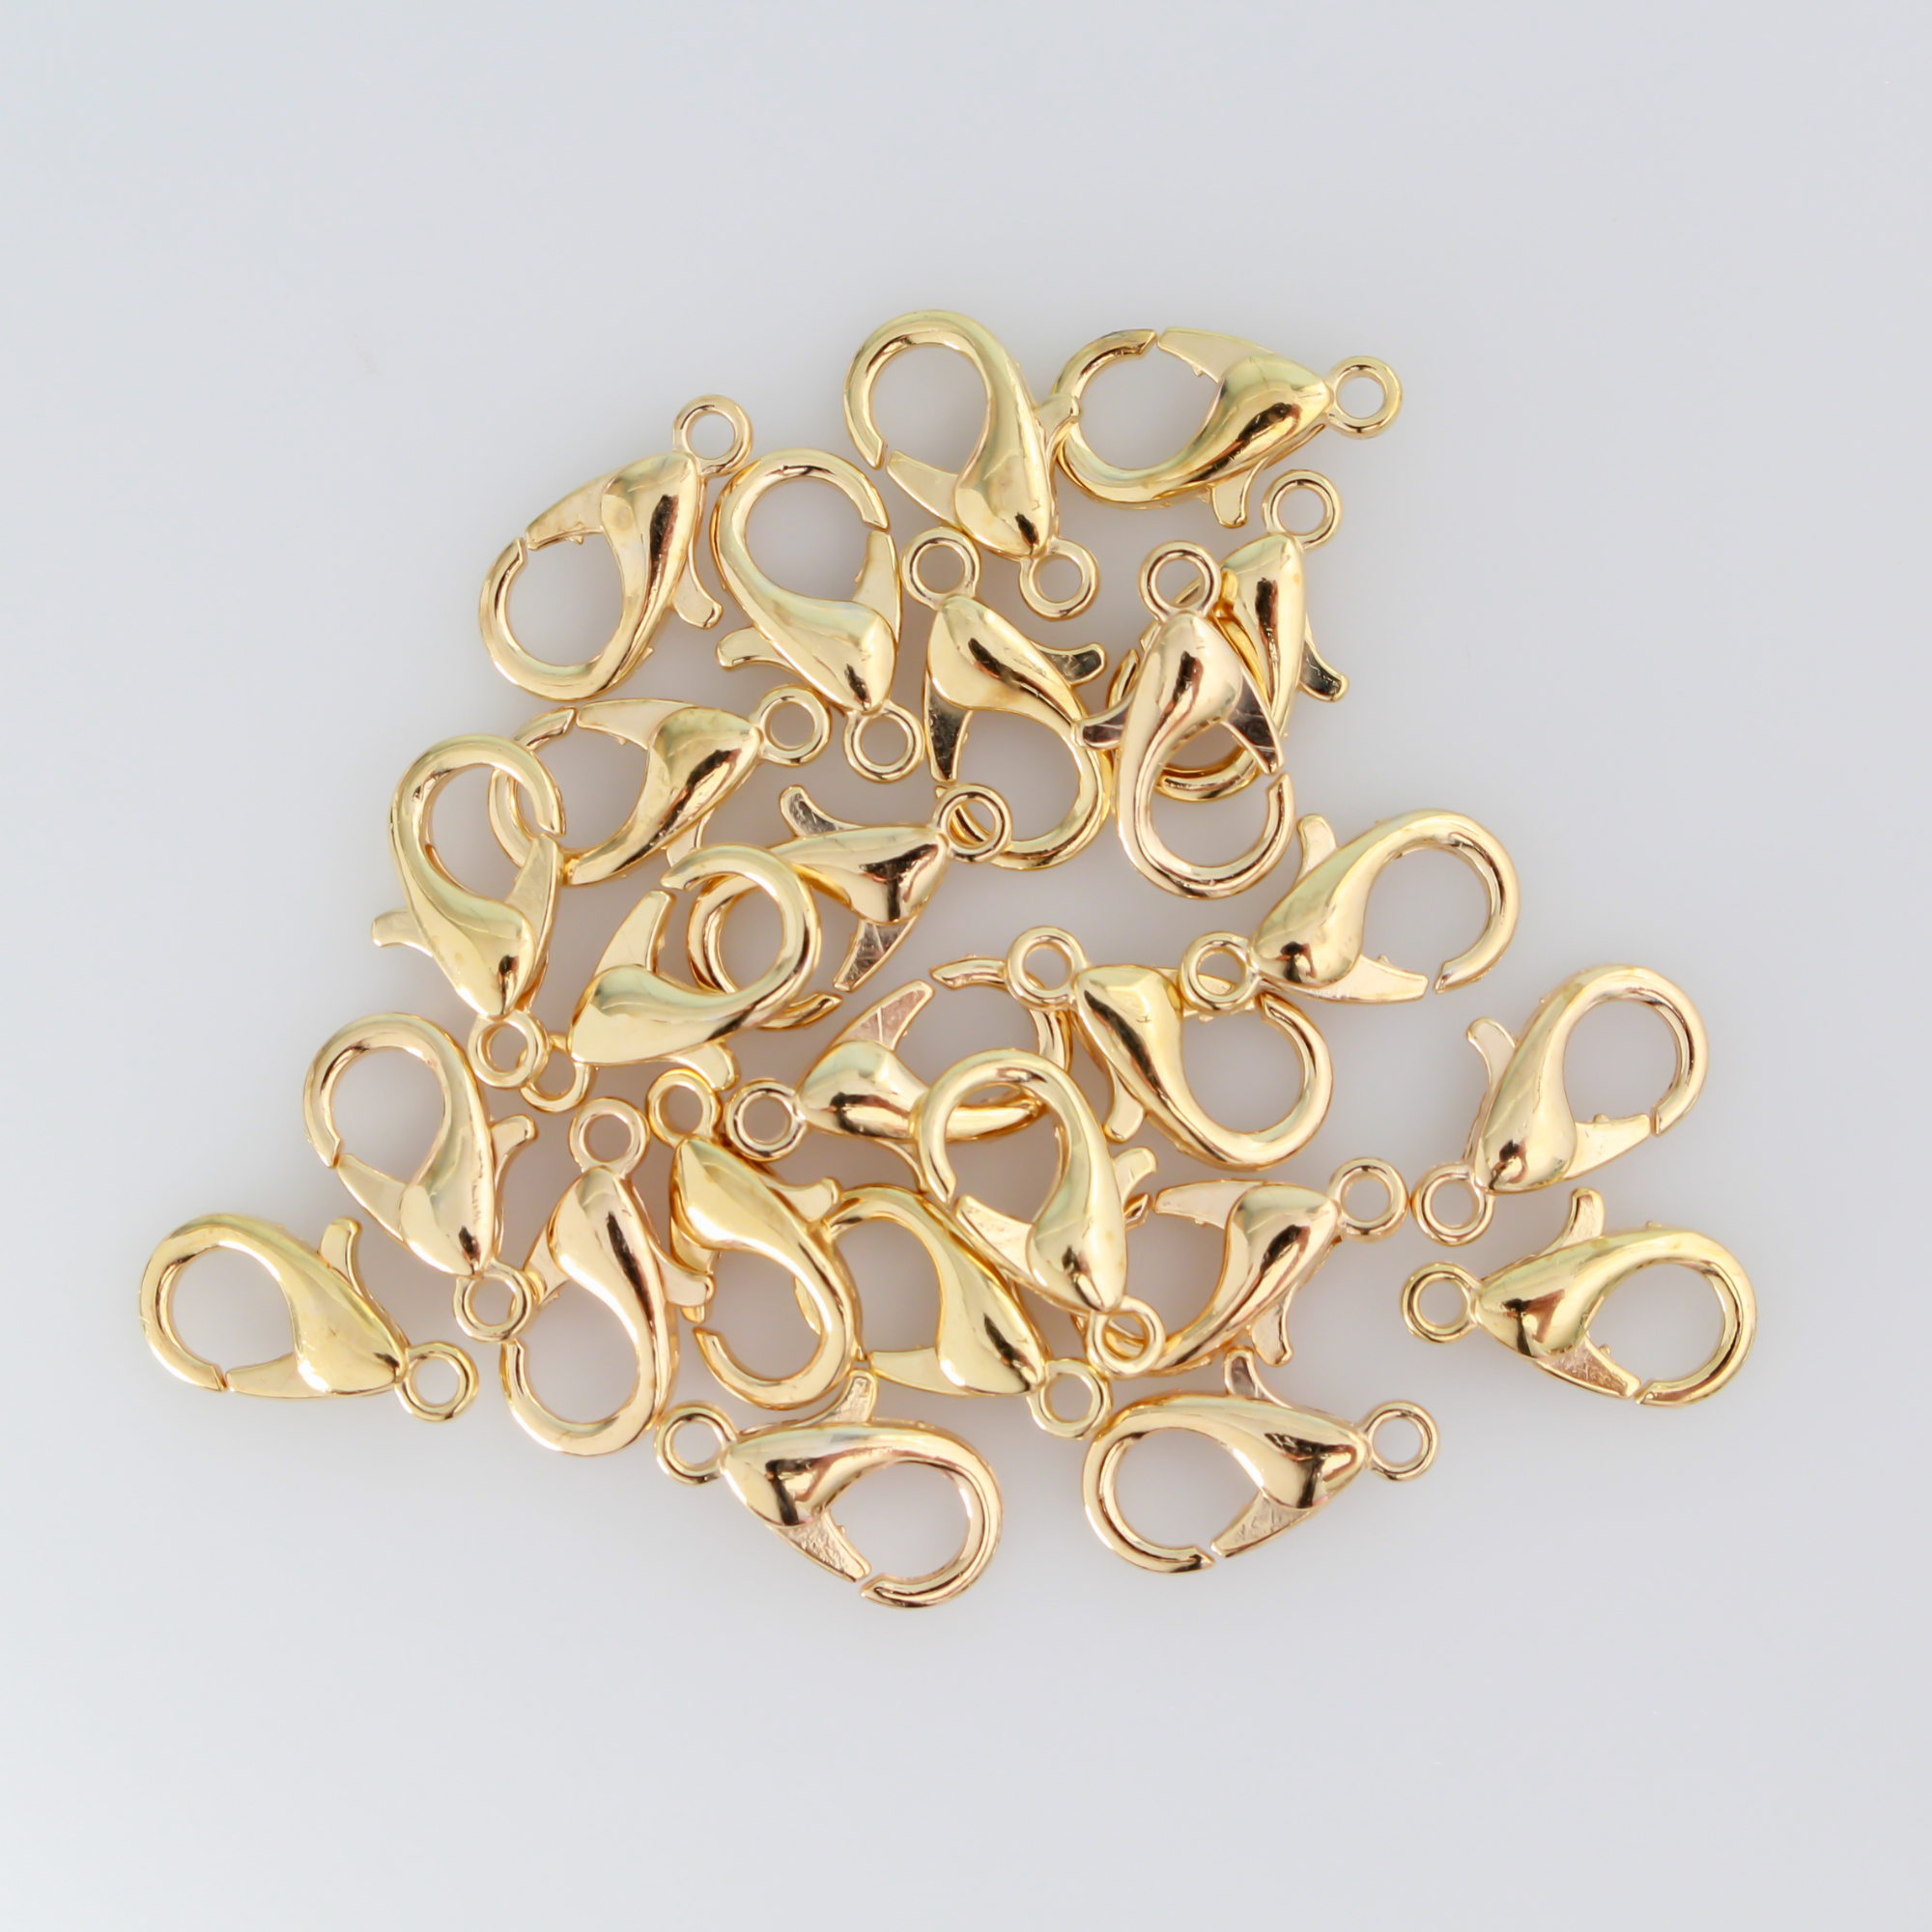 Light gold lobster claw findings, 12mm long by 6mm wide